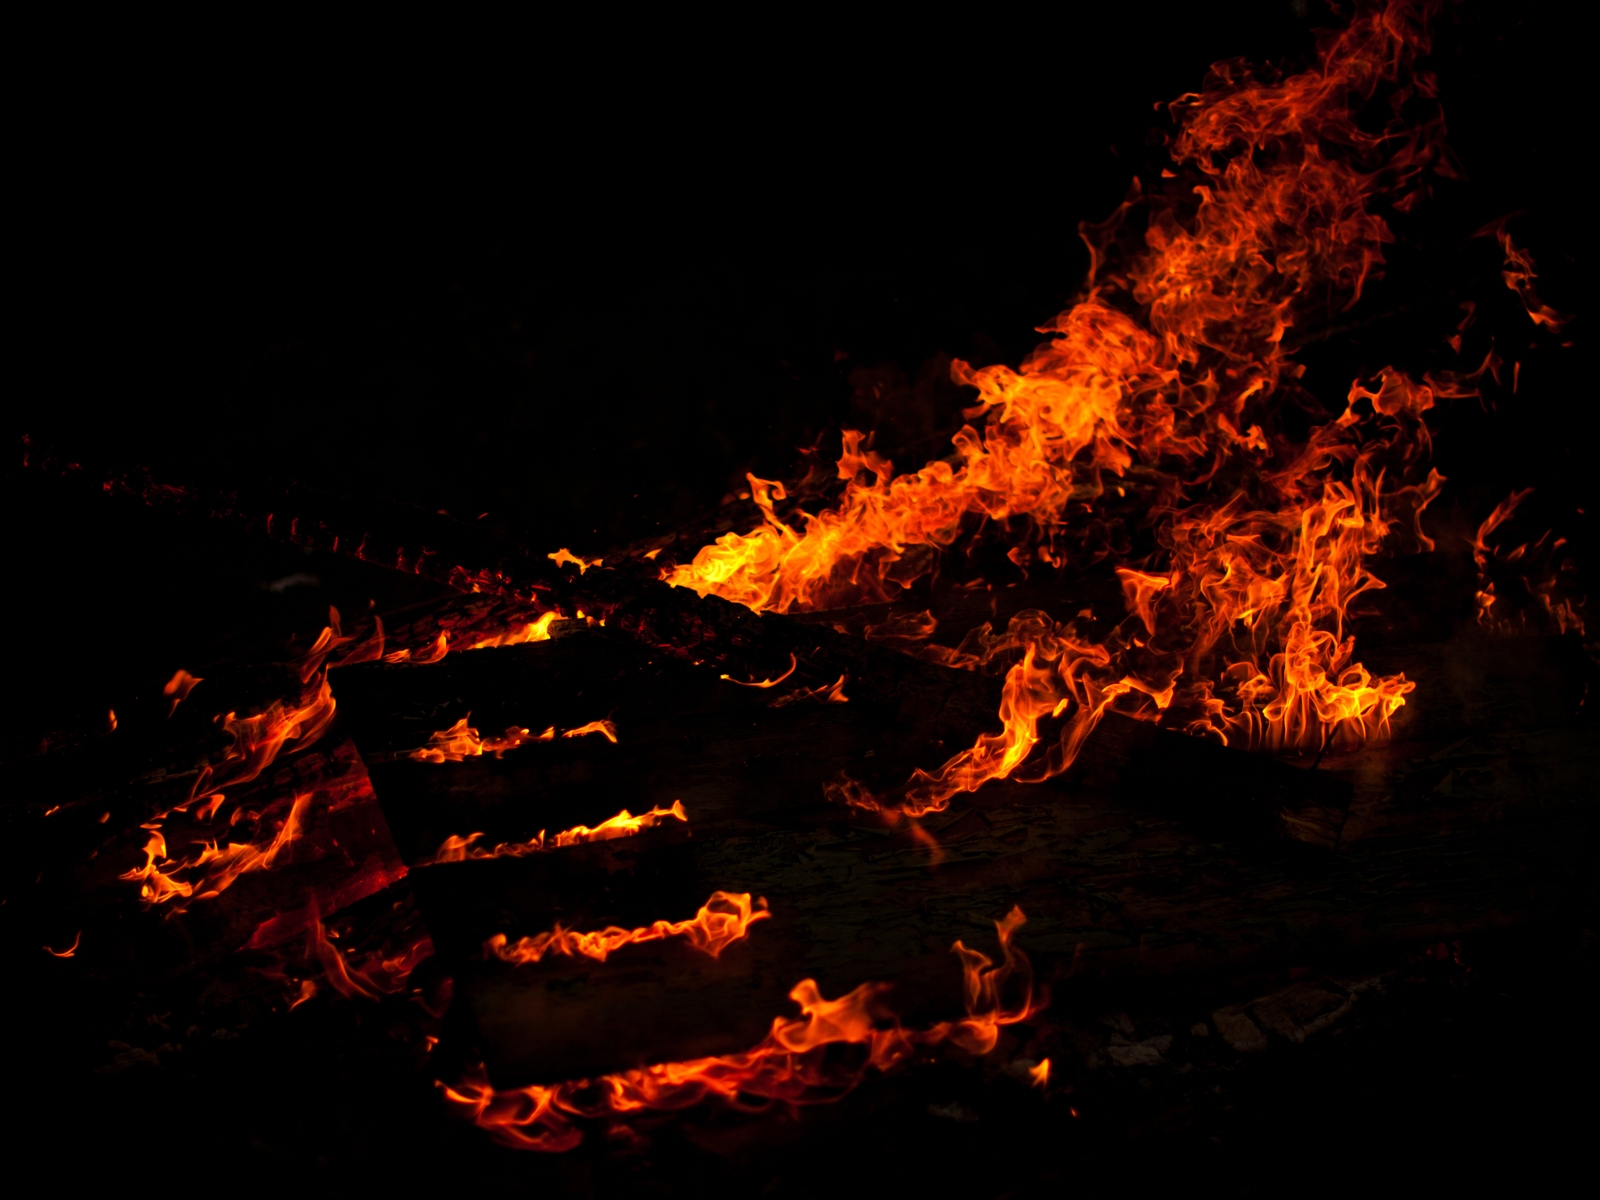 Night and Fire for 1600 x 1200 resolution